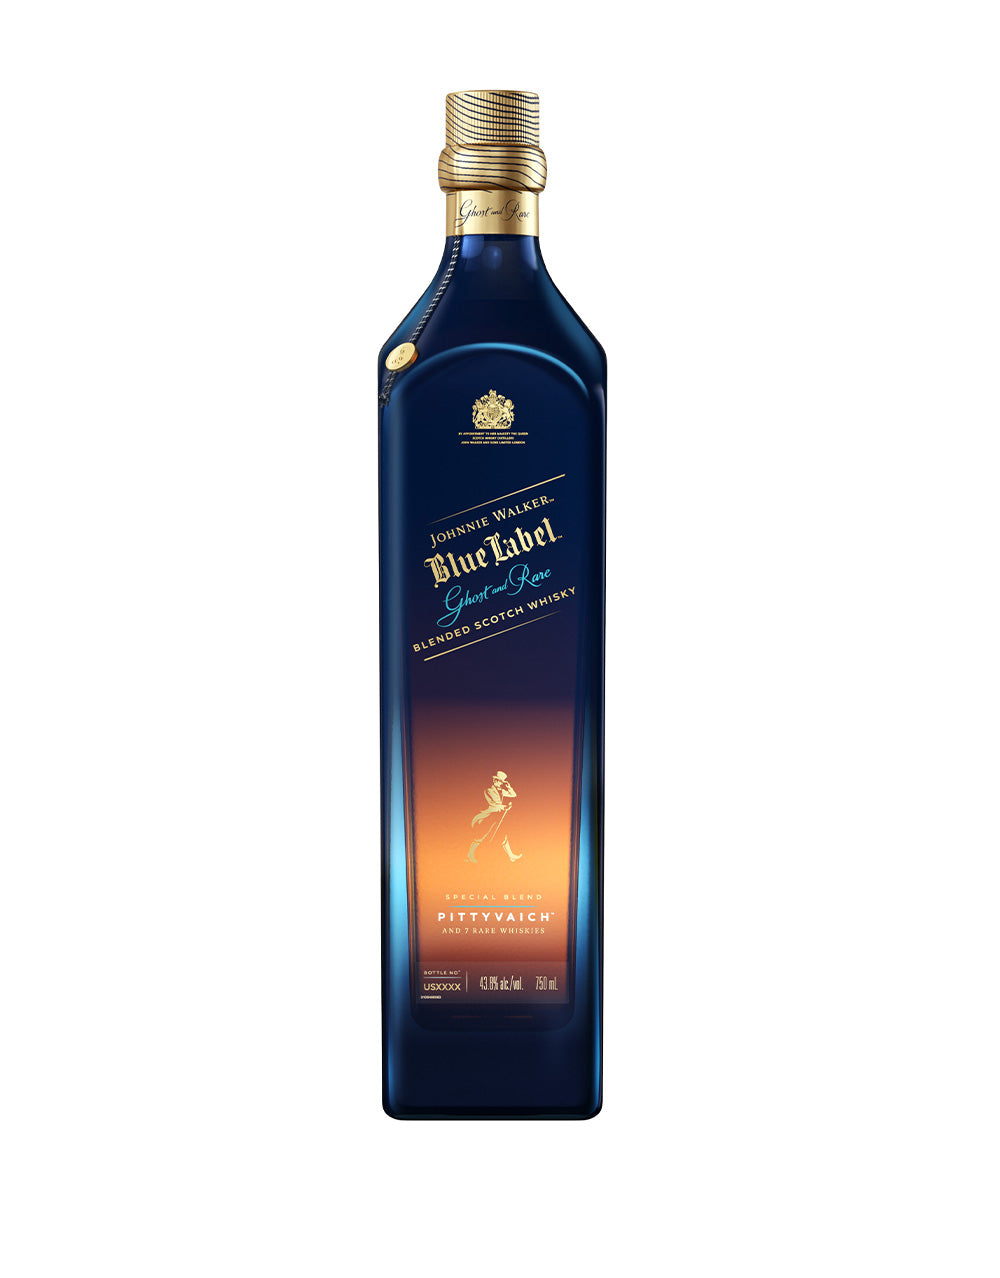 in stand houden amateur Gepensioneerde Johnnie Walker Blue Label Ghost and Rare Pittyvaich Blended Scotch Whisky |  ReserveBar